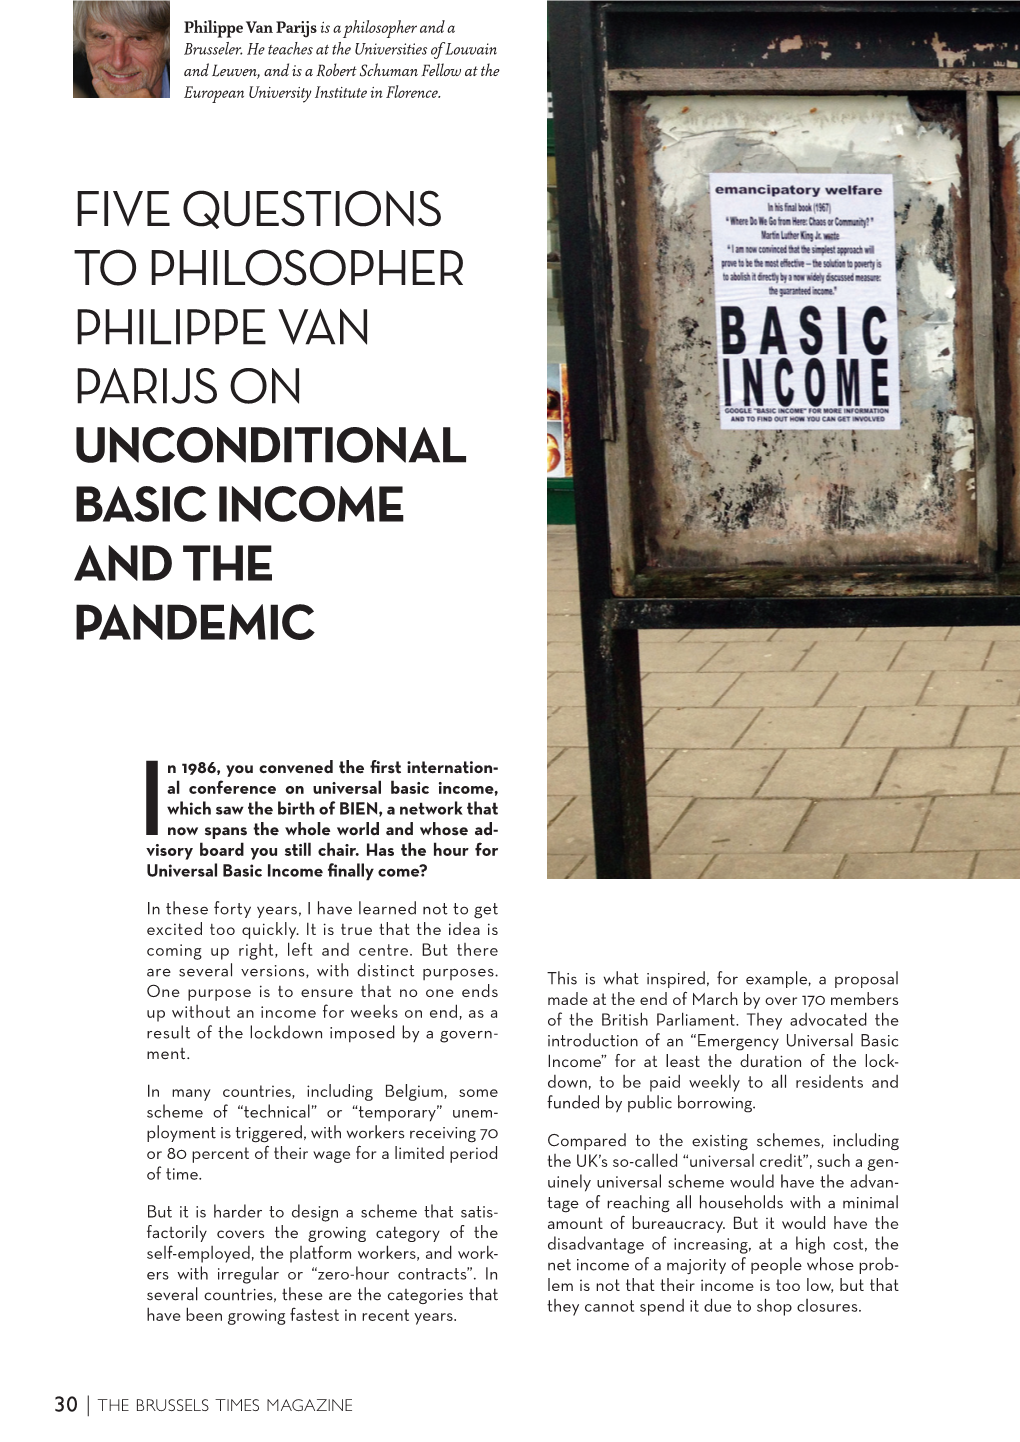 Five Questions to Philosopher Philippe Van Parijs on Unconditional Basic Income and the Pandemic